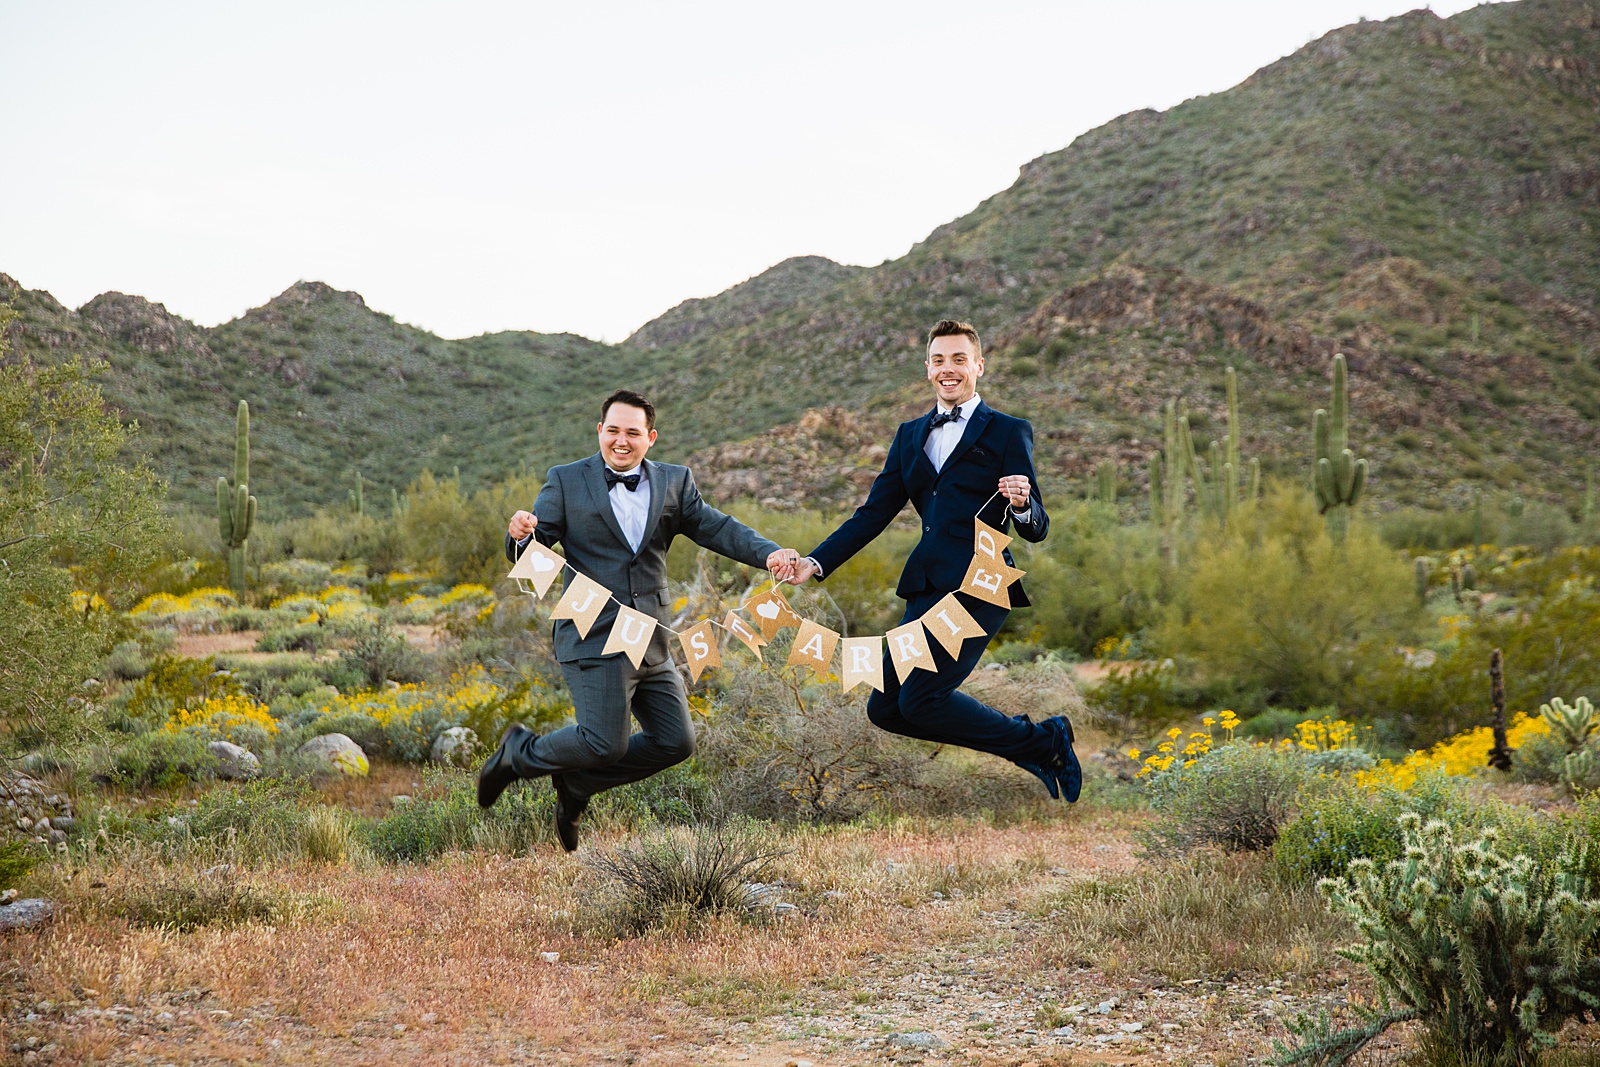 LGBTQ couple jumping together as newlyweds by PMA Photography.